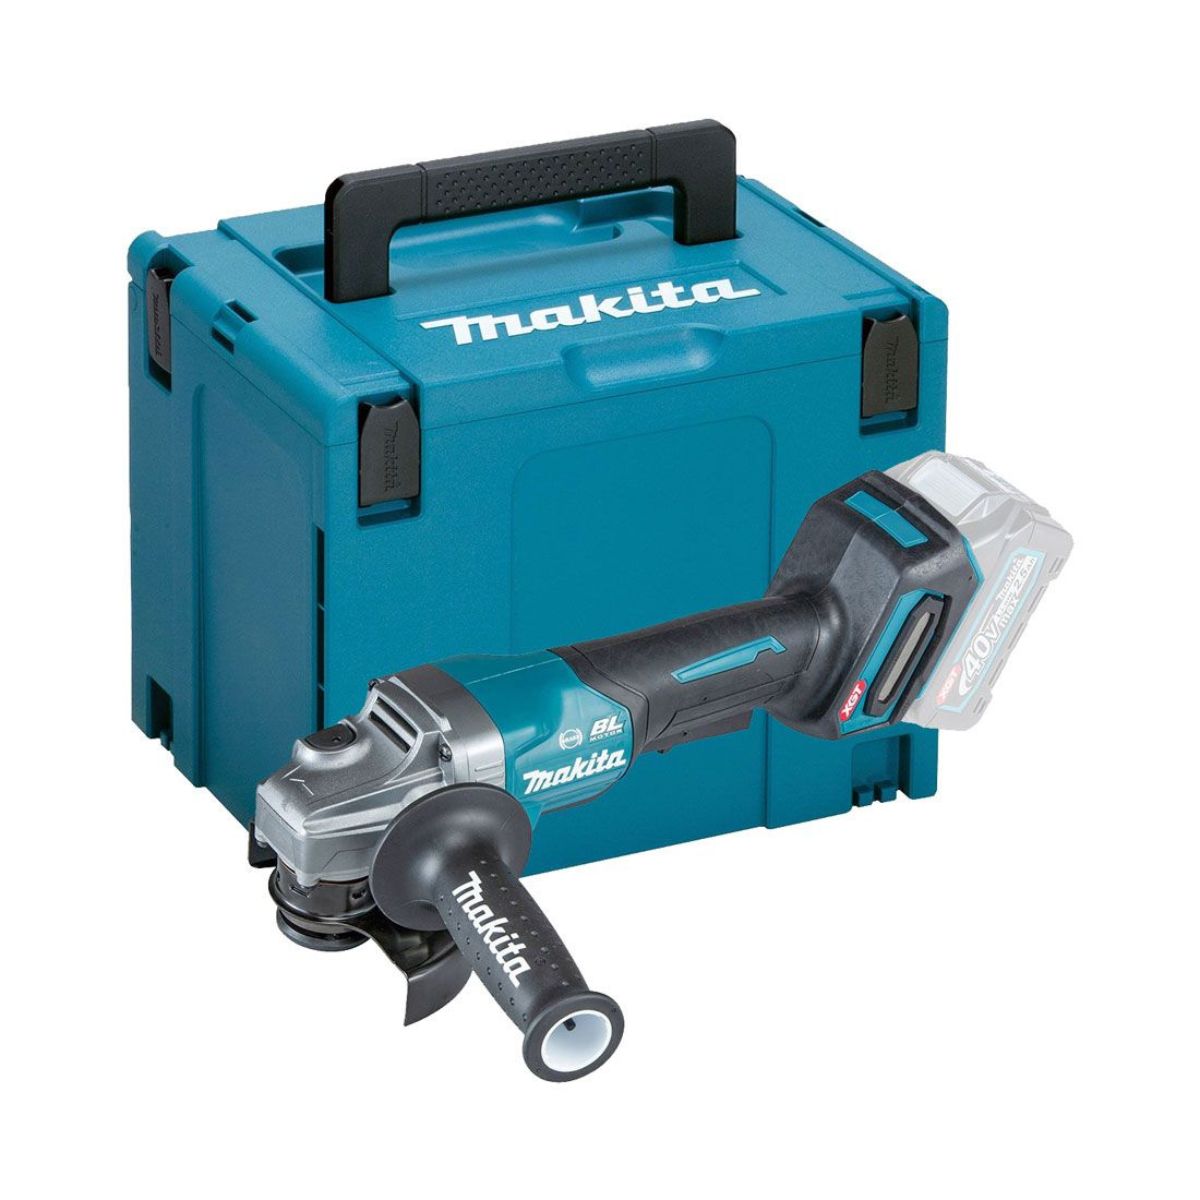 Makita GA012GZ01 40v Max XGT 115mm Brushless Angle Grinder Body Only With Carry Case